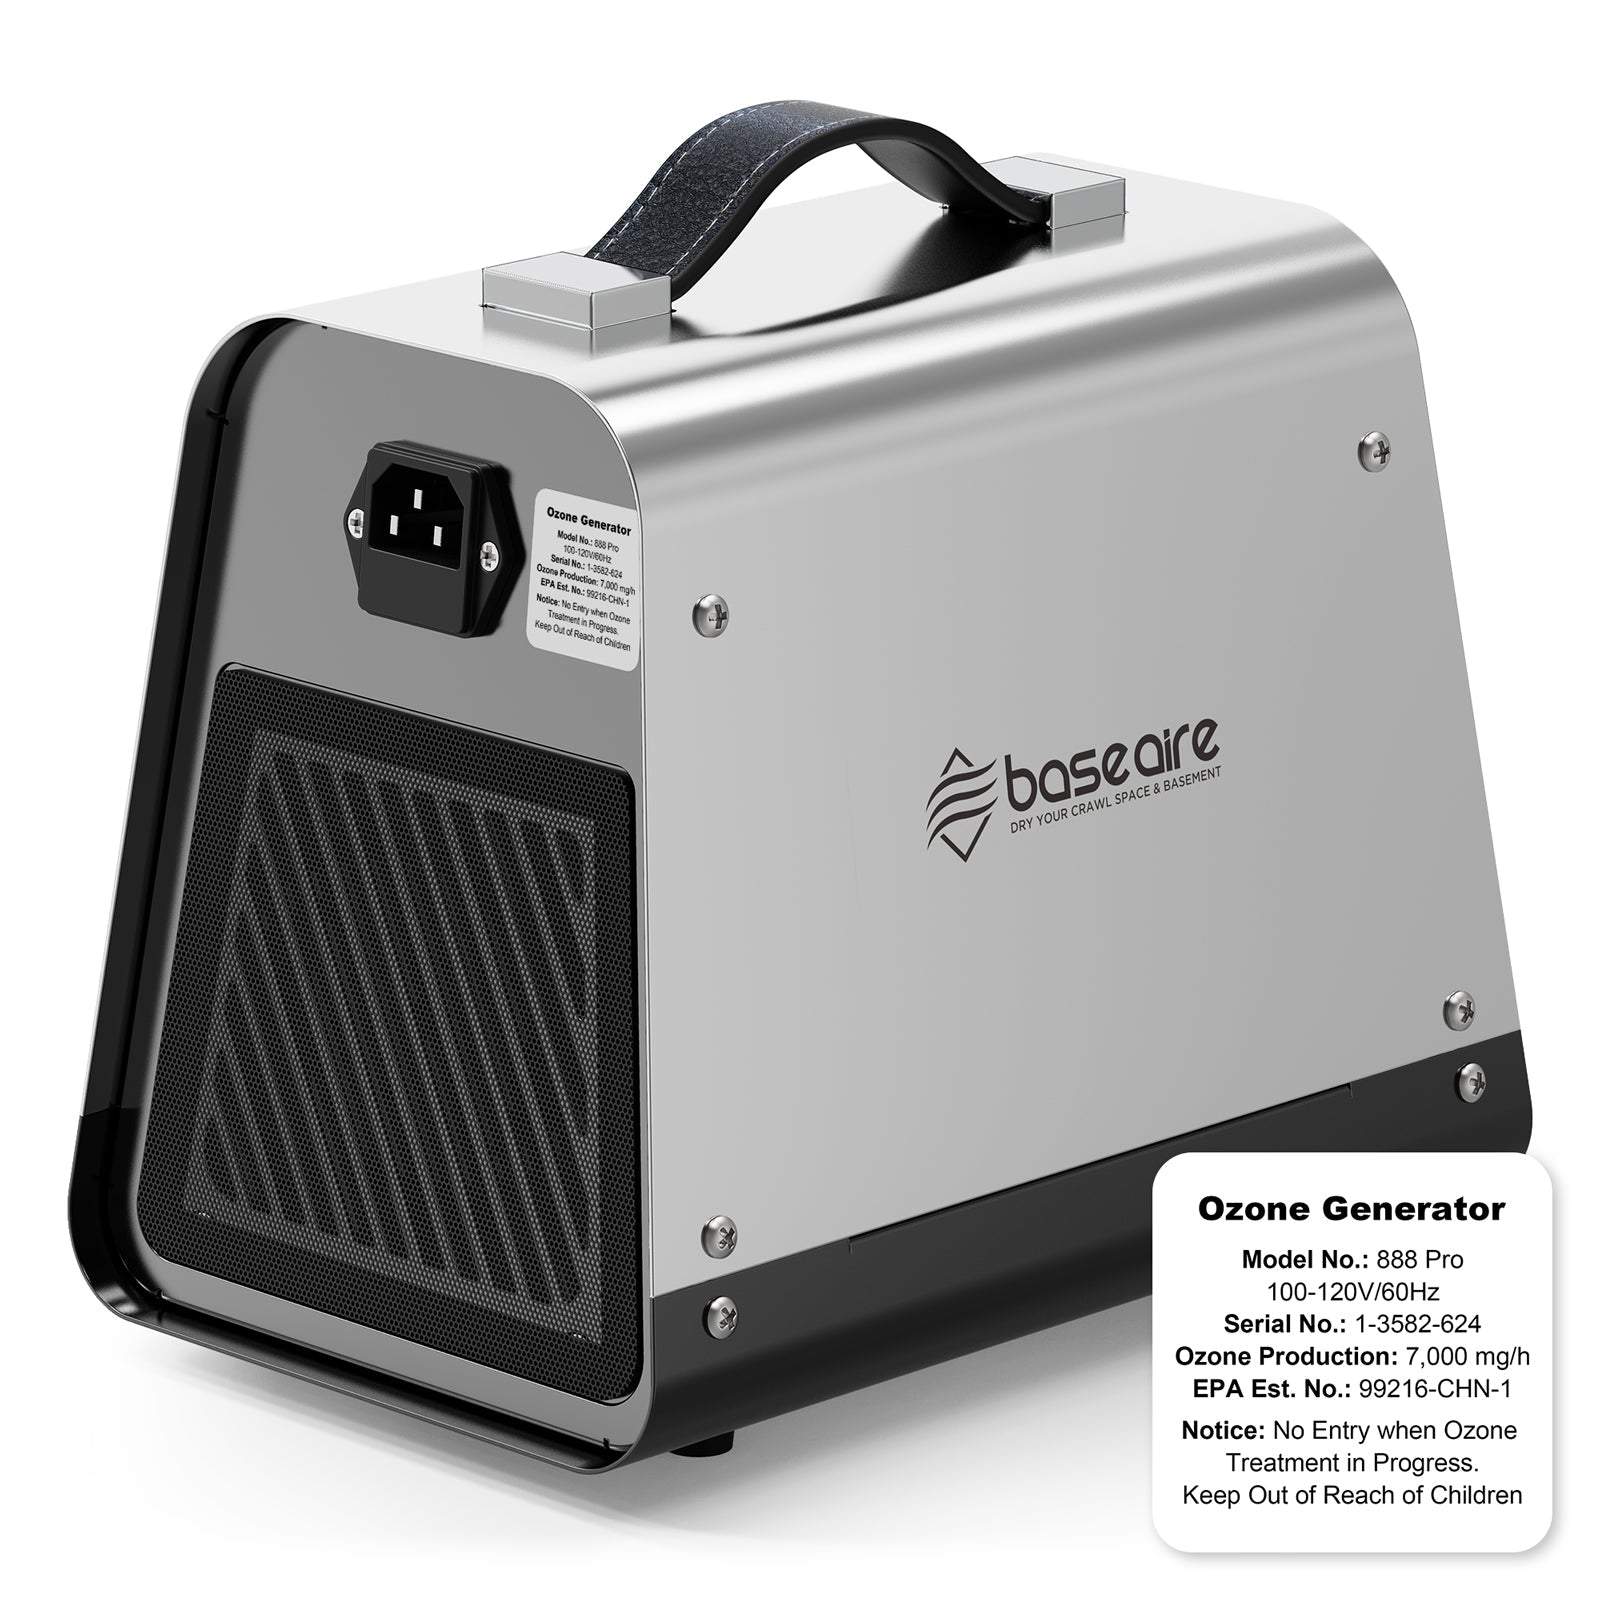 BaseAire 888 Pro 7,000 mg/h Ozone Generator, Digital O3 Machine Home Ozone Machine Deodorizer - Ozone Generator from [store] by Baseaire - Disinfection, Ozone Generator